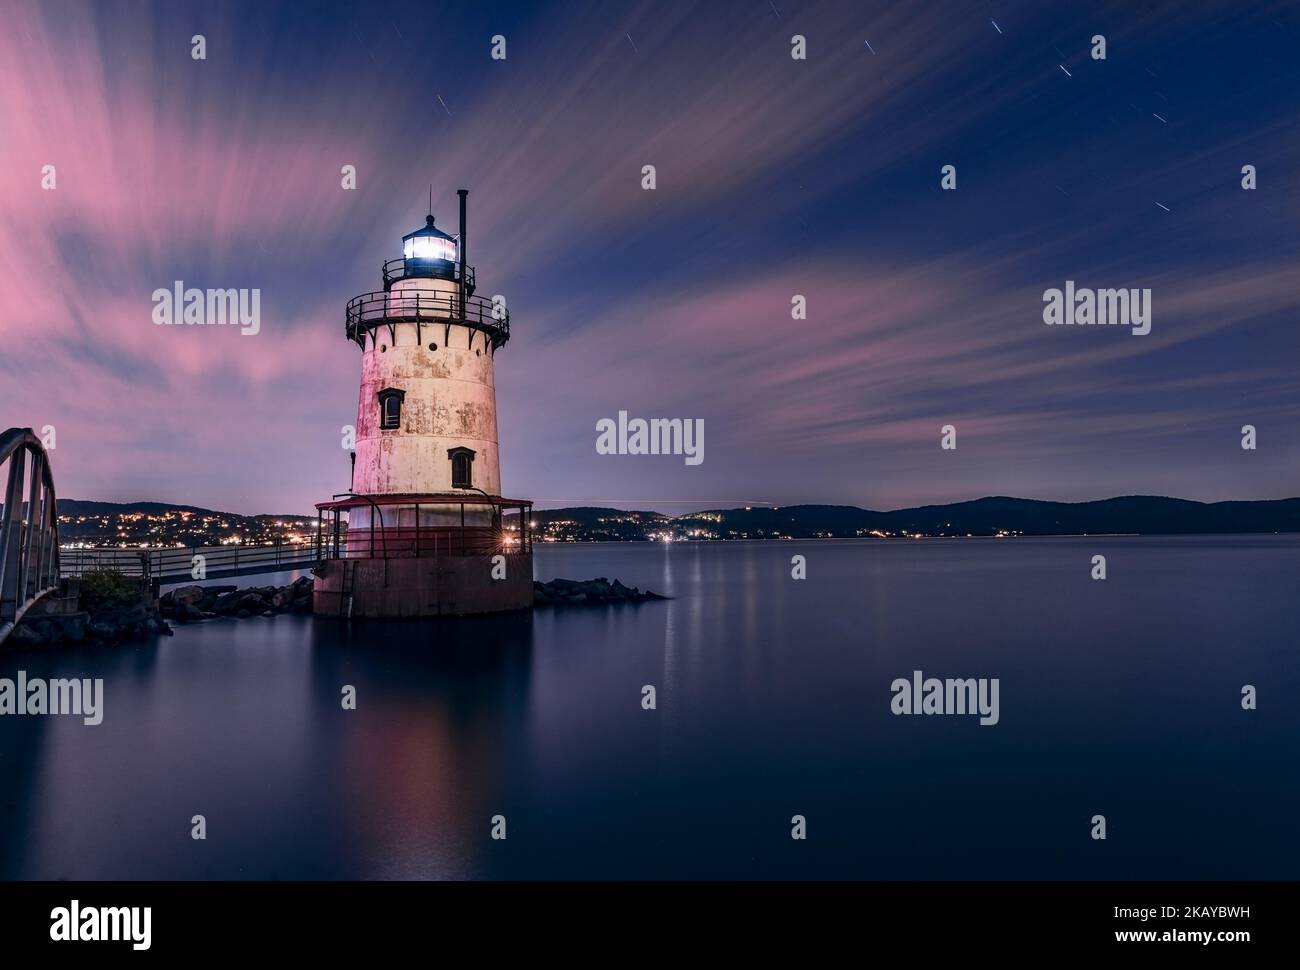 A beautiful night view of the Tarrytown Lighthouse in Sleepy Hollow, NY, with long exposure clouds Stock Photo